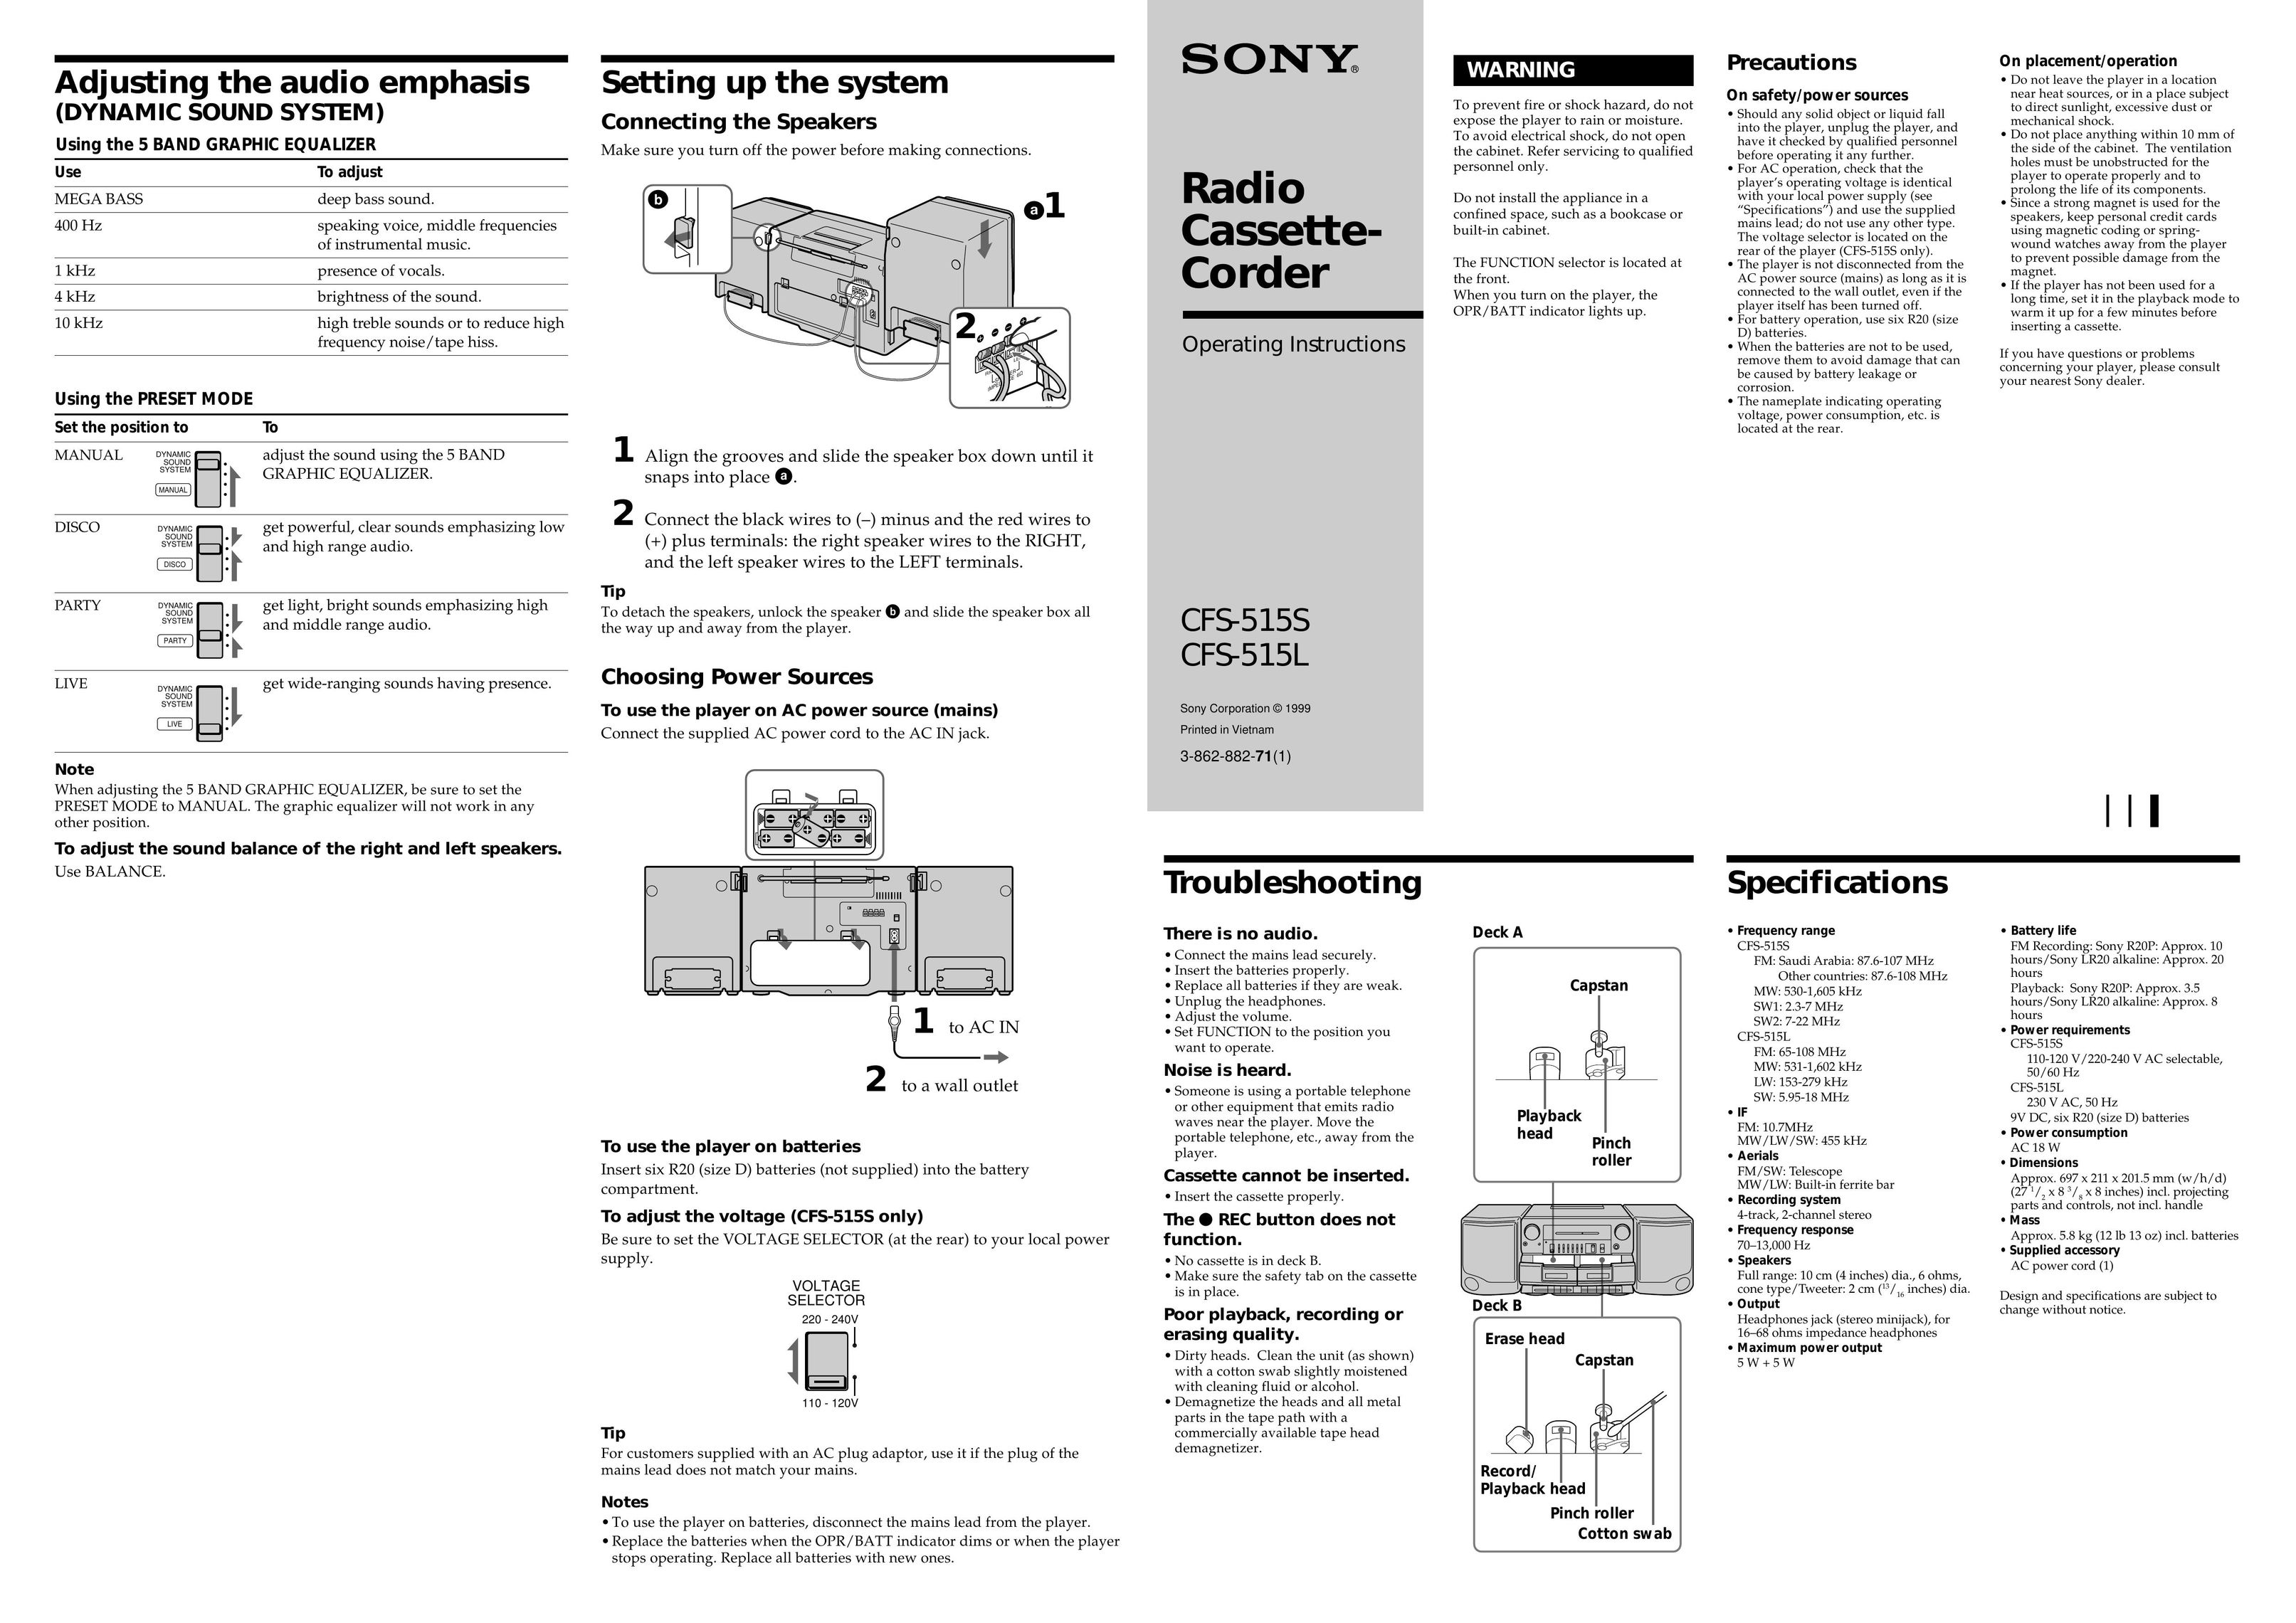 Sony CFS-515S Microcassette Recorder User Manual